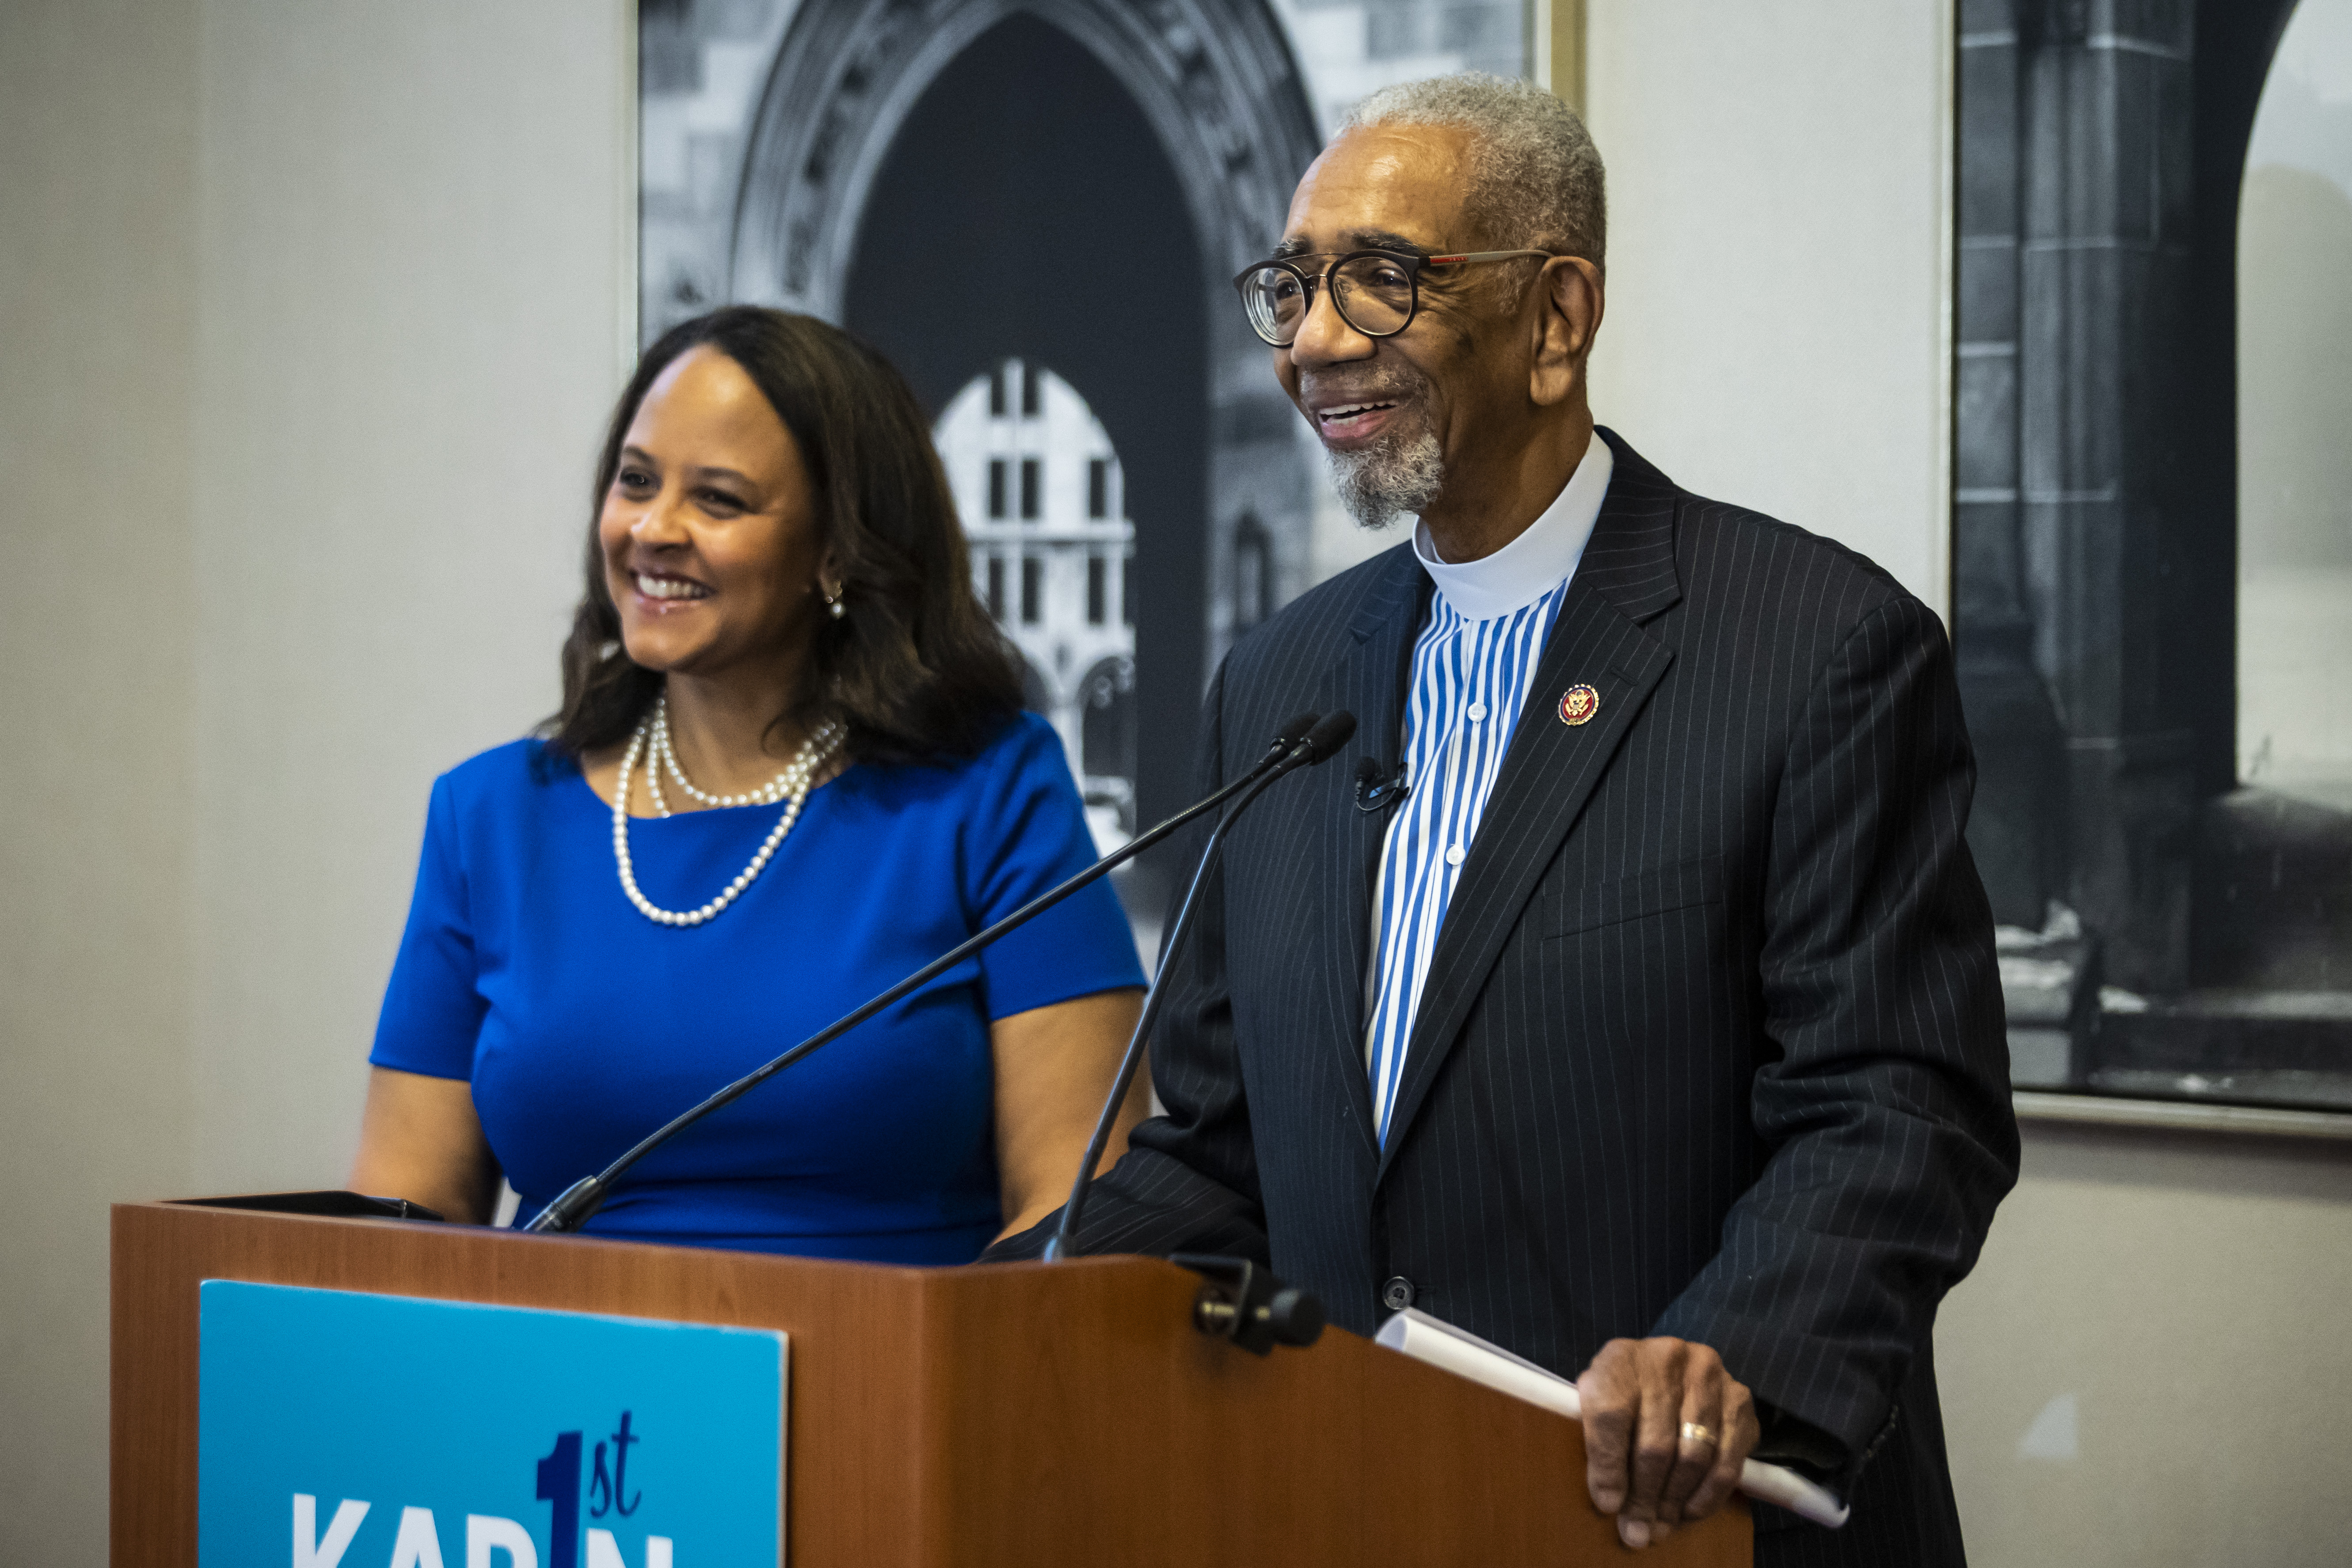 Rep. Bobby Rush, D-Ill., retiring from Congress next year after 15 terms, on Thursday endorsed Karin Norington-Reaves in the race to succeed him.